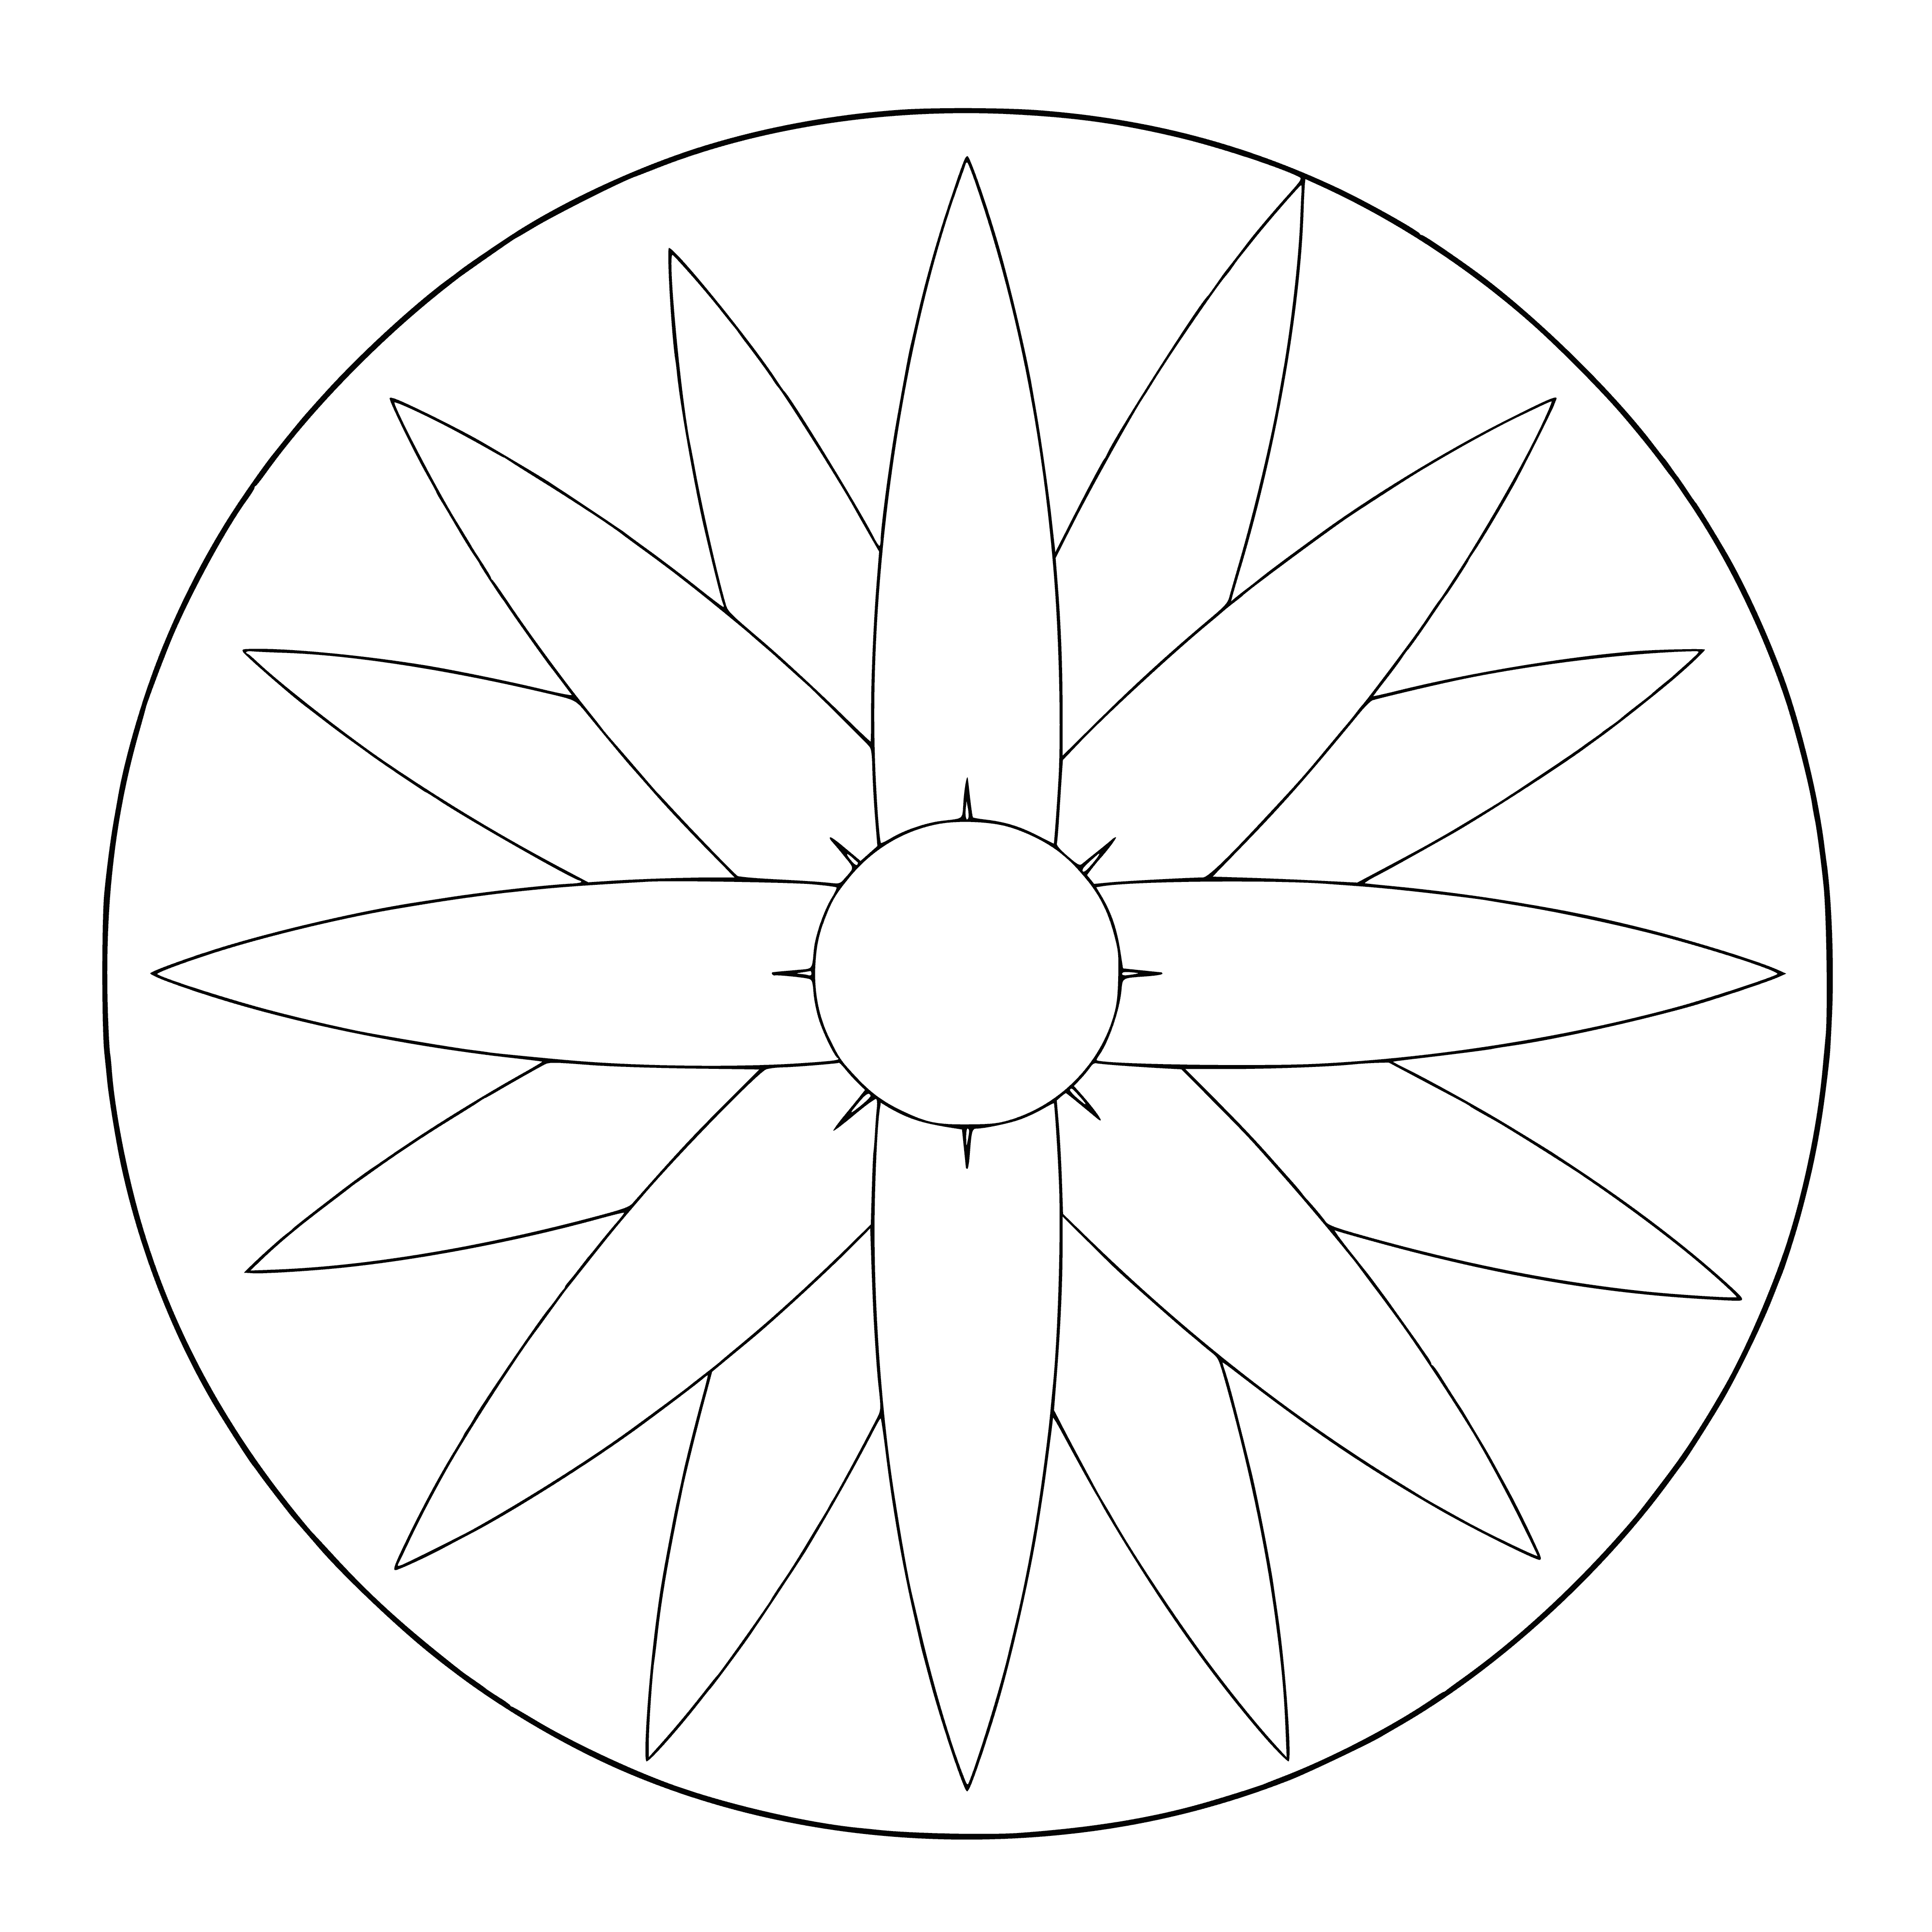 coloring page: Geometric mandala of a dot center radiating a black & white repeating pattern outward.